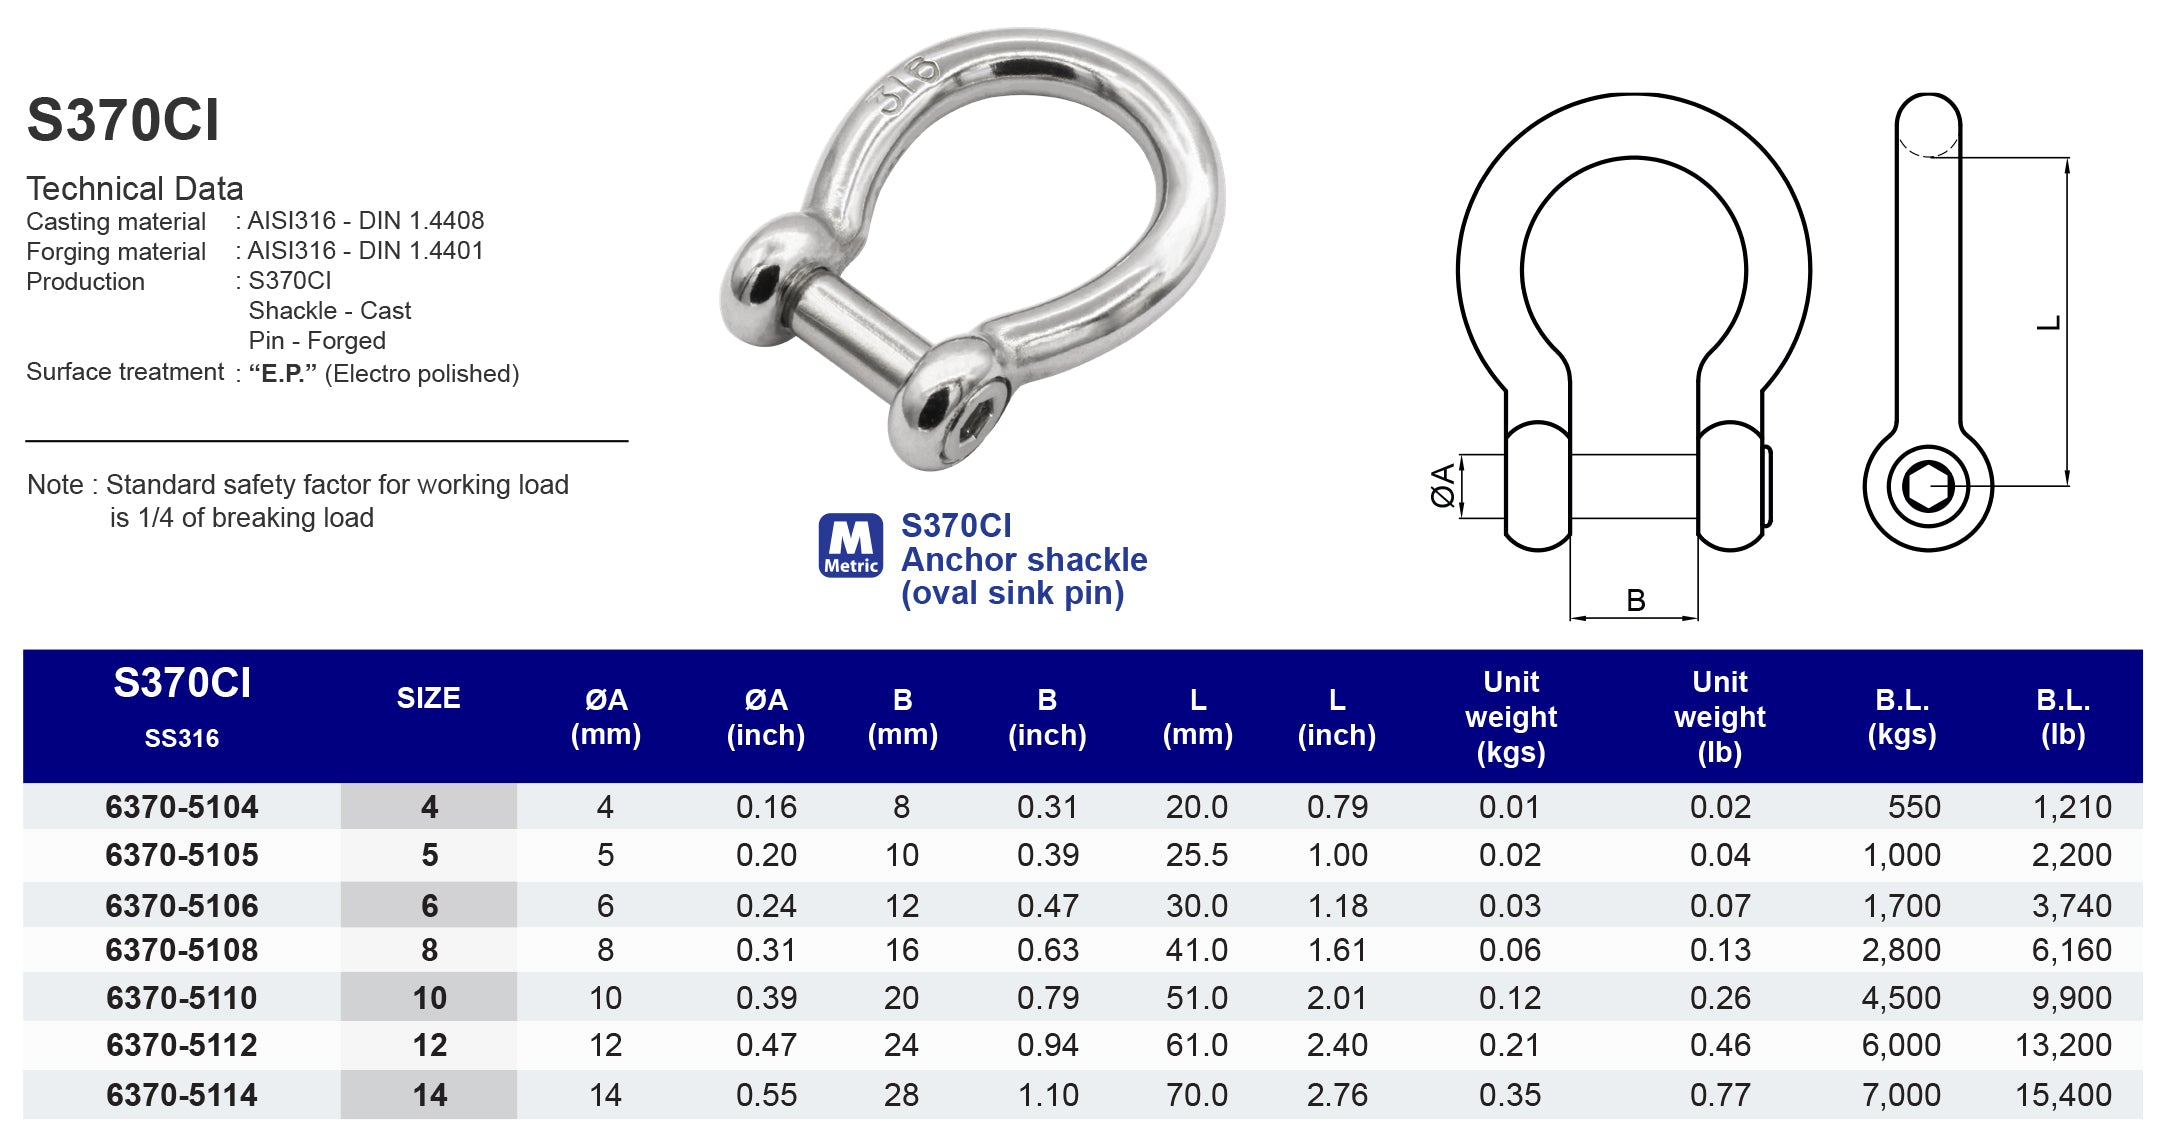 S370CI Anchor shackle (oval sink pin) - 316